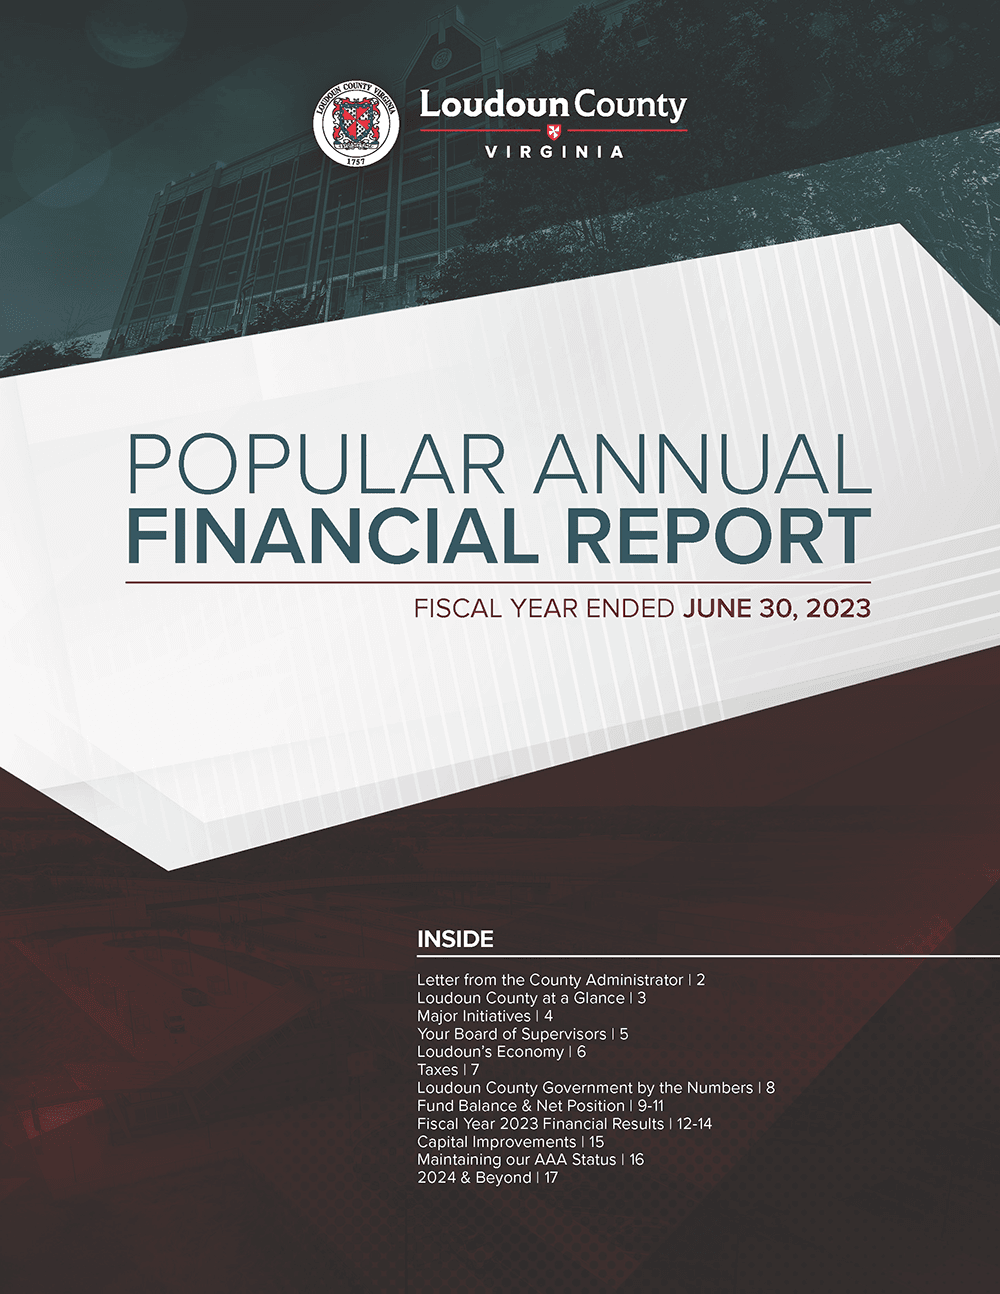 Link to the Fiscal Year 2023 Popular Annual Financial Report